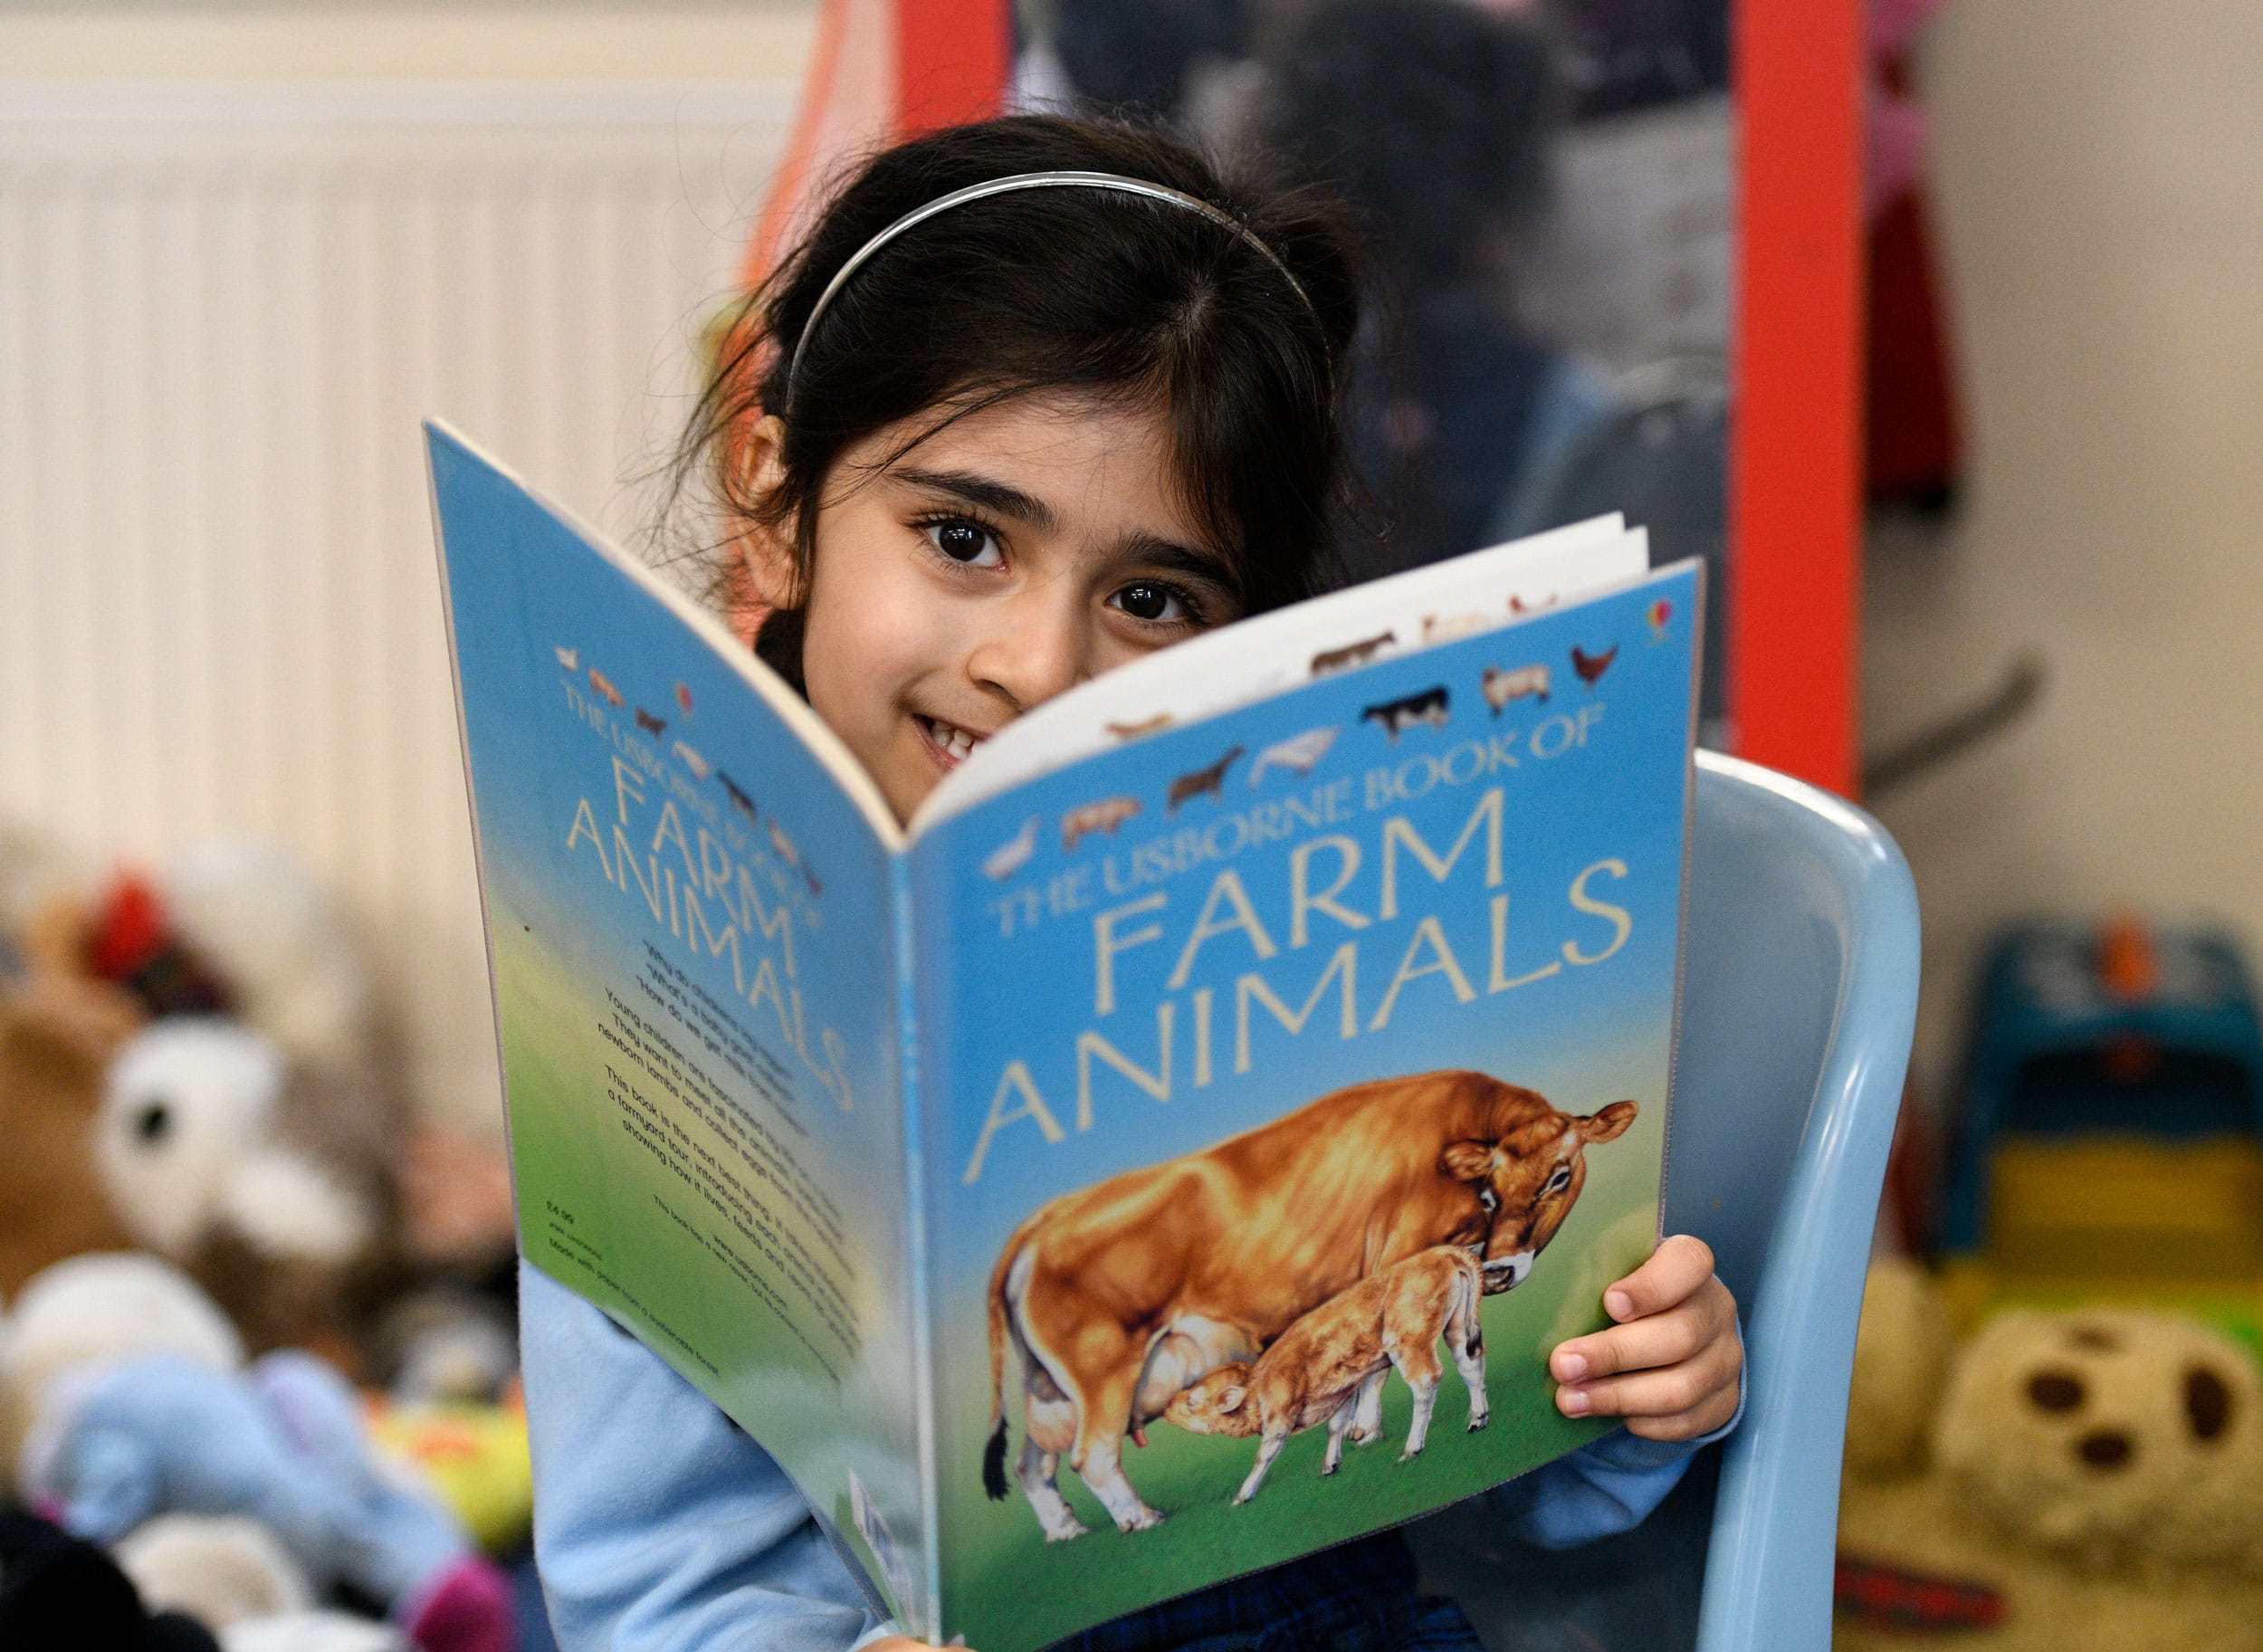 A child looking up above a book about farm animals.